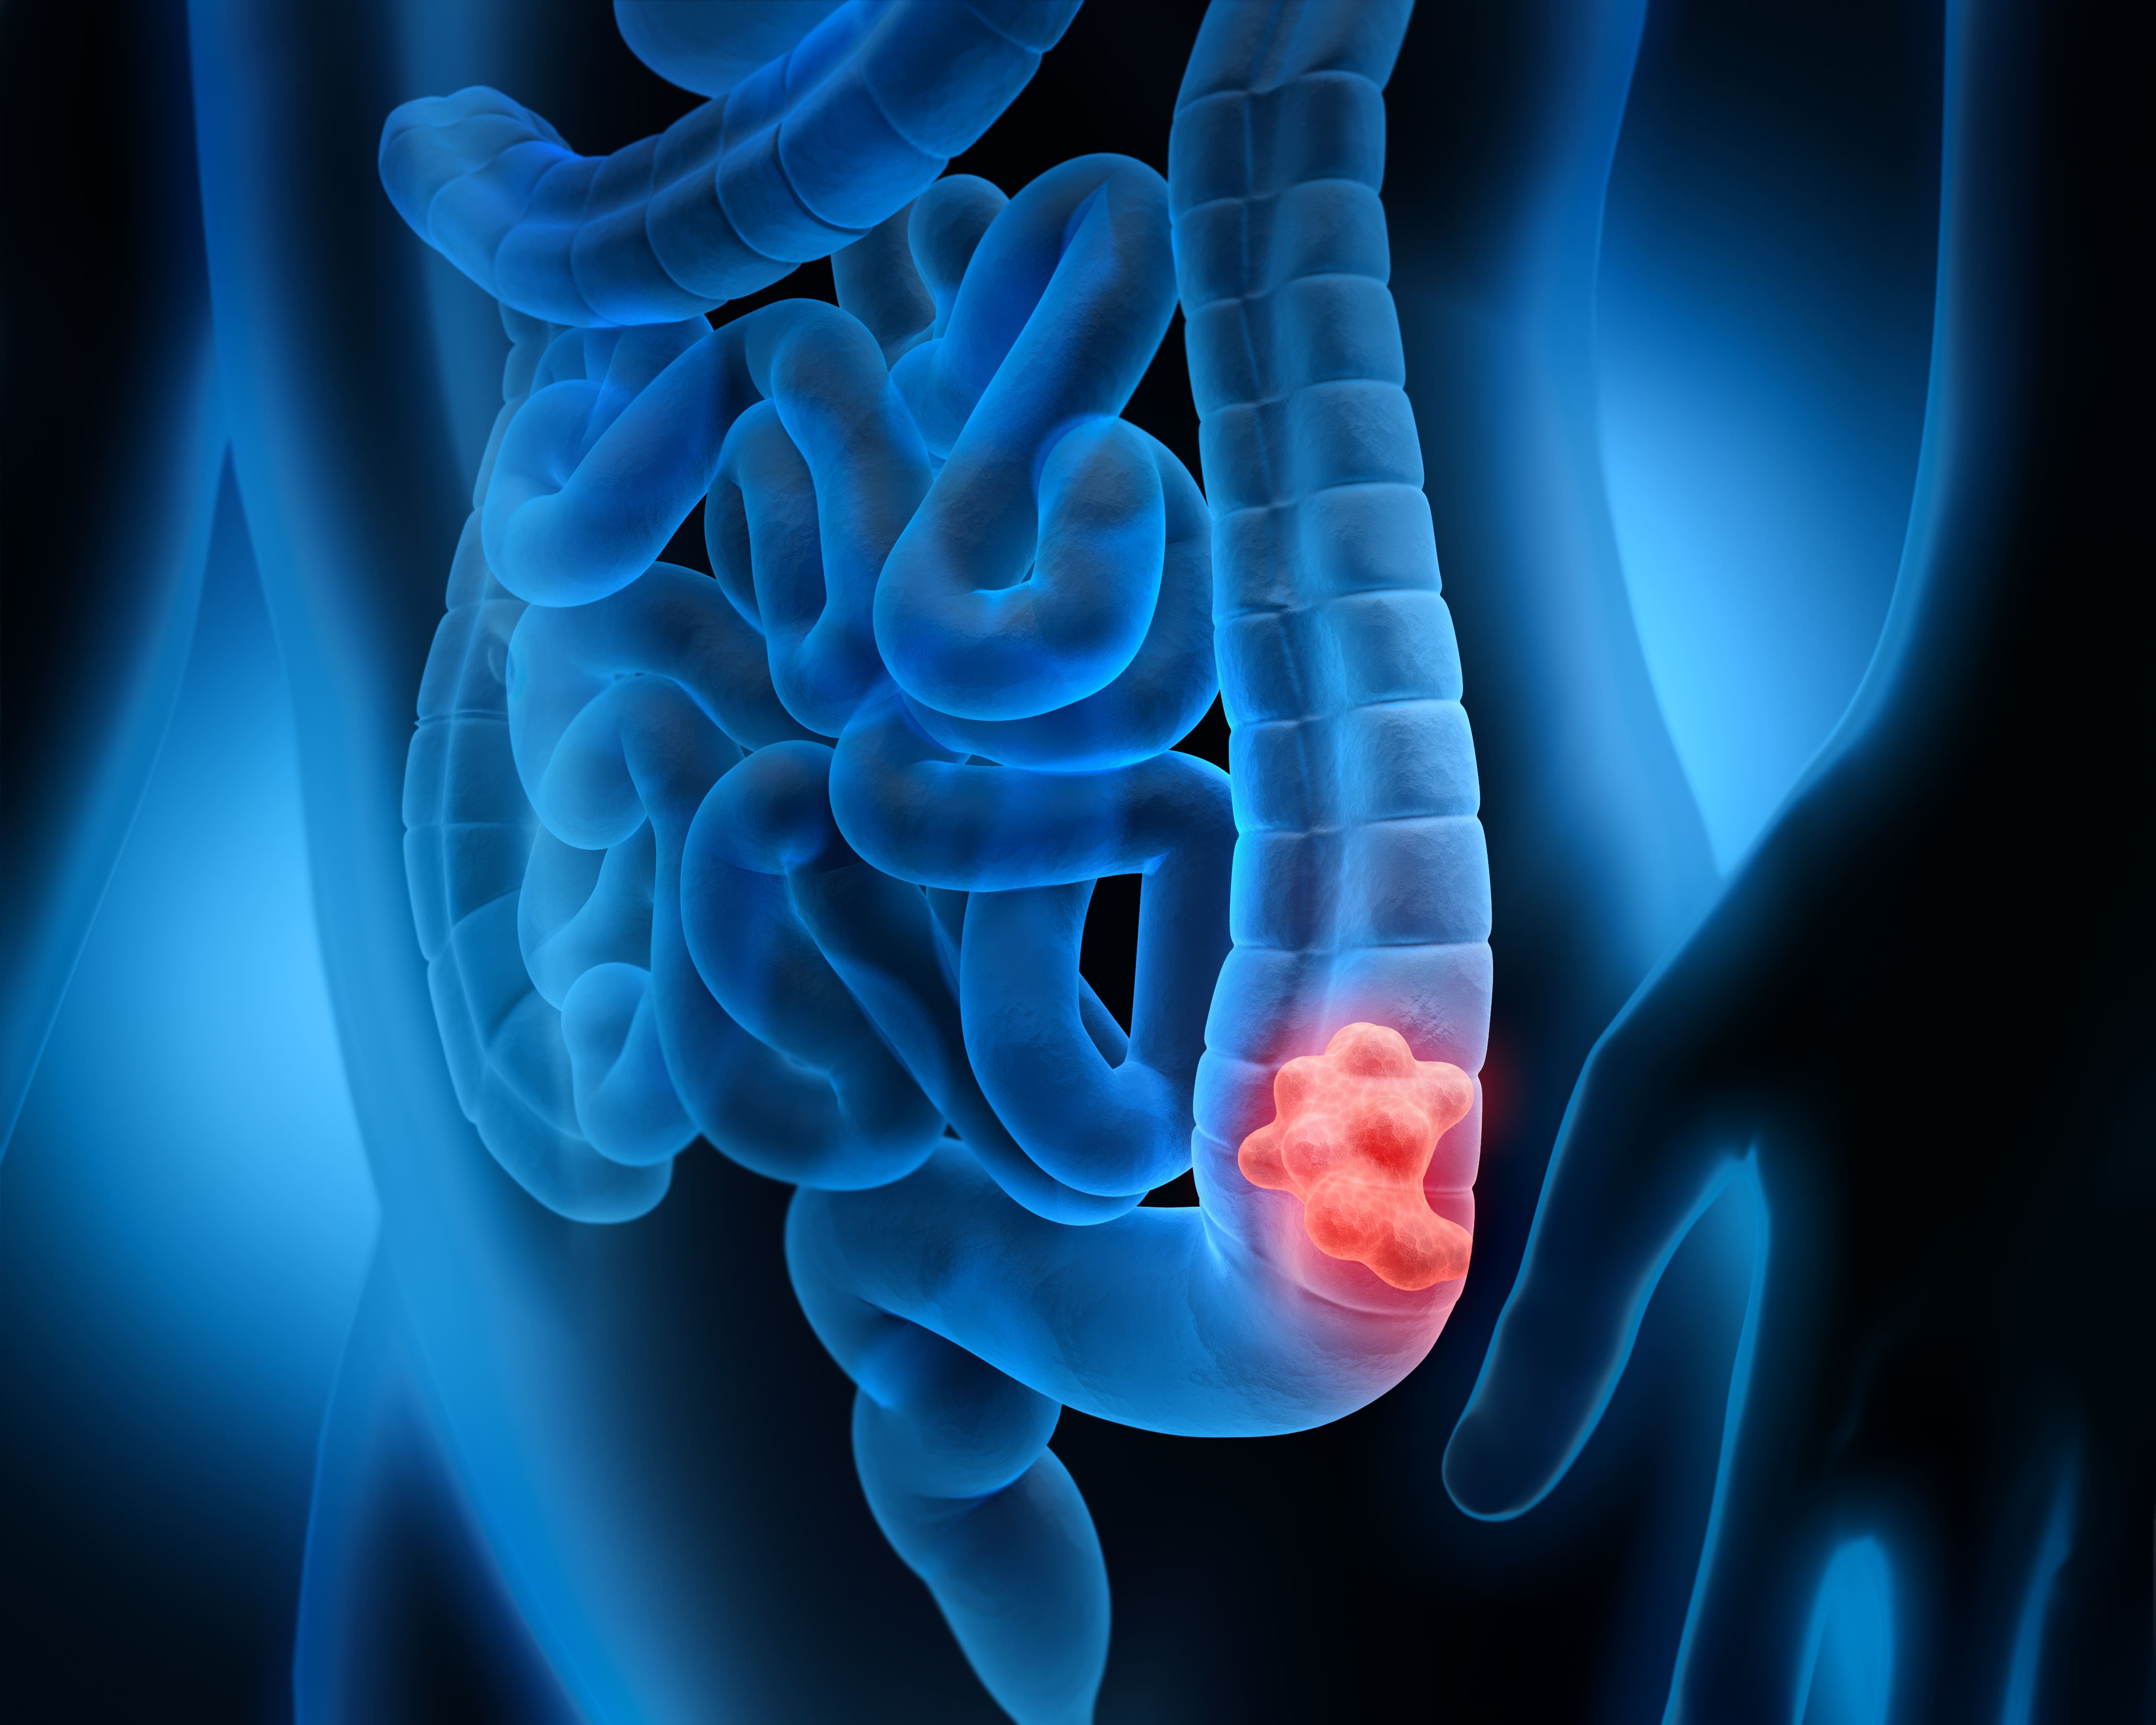 What Symptoms of Colon Cancer Emerge in Men and Women